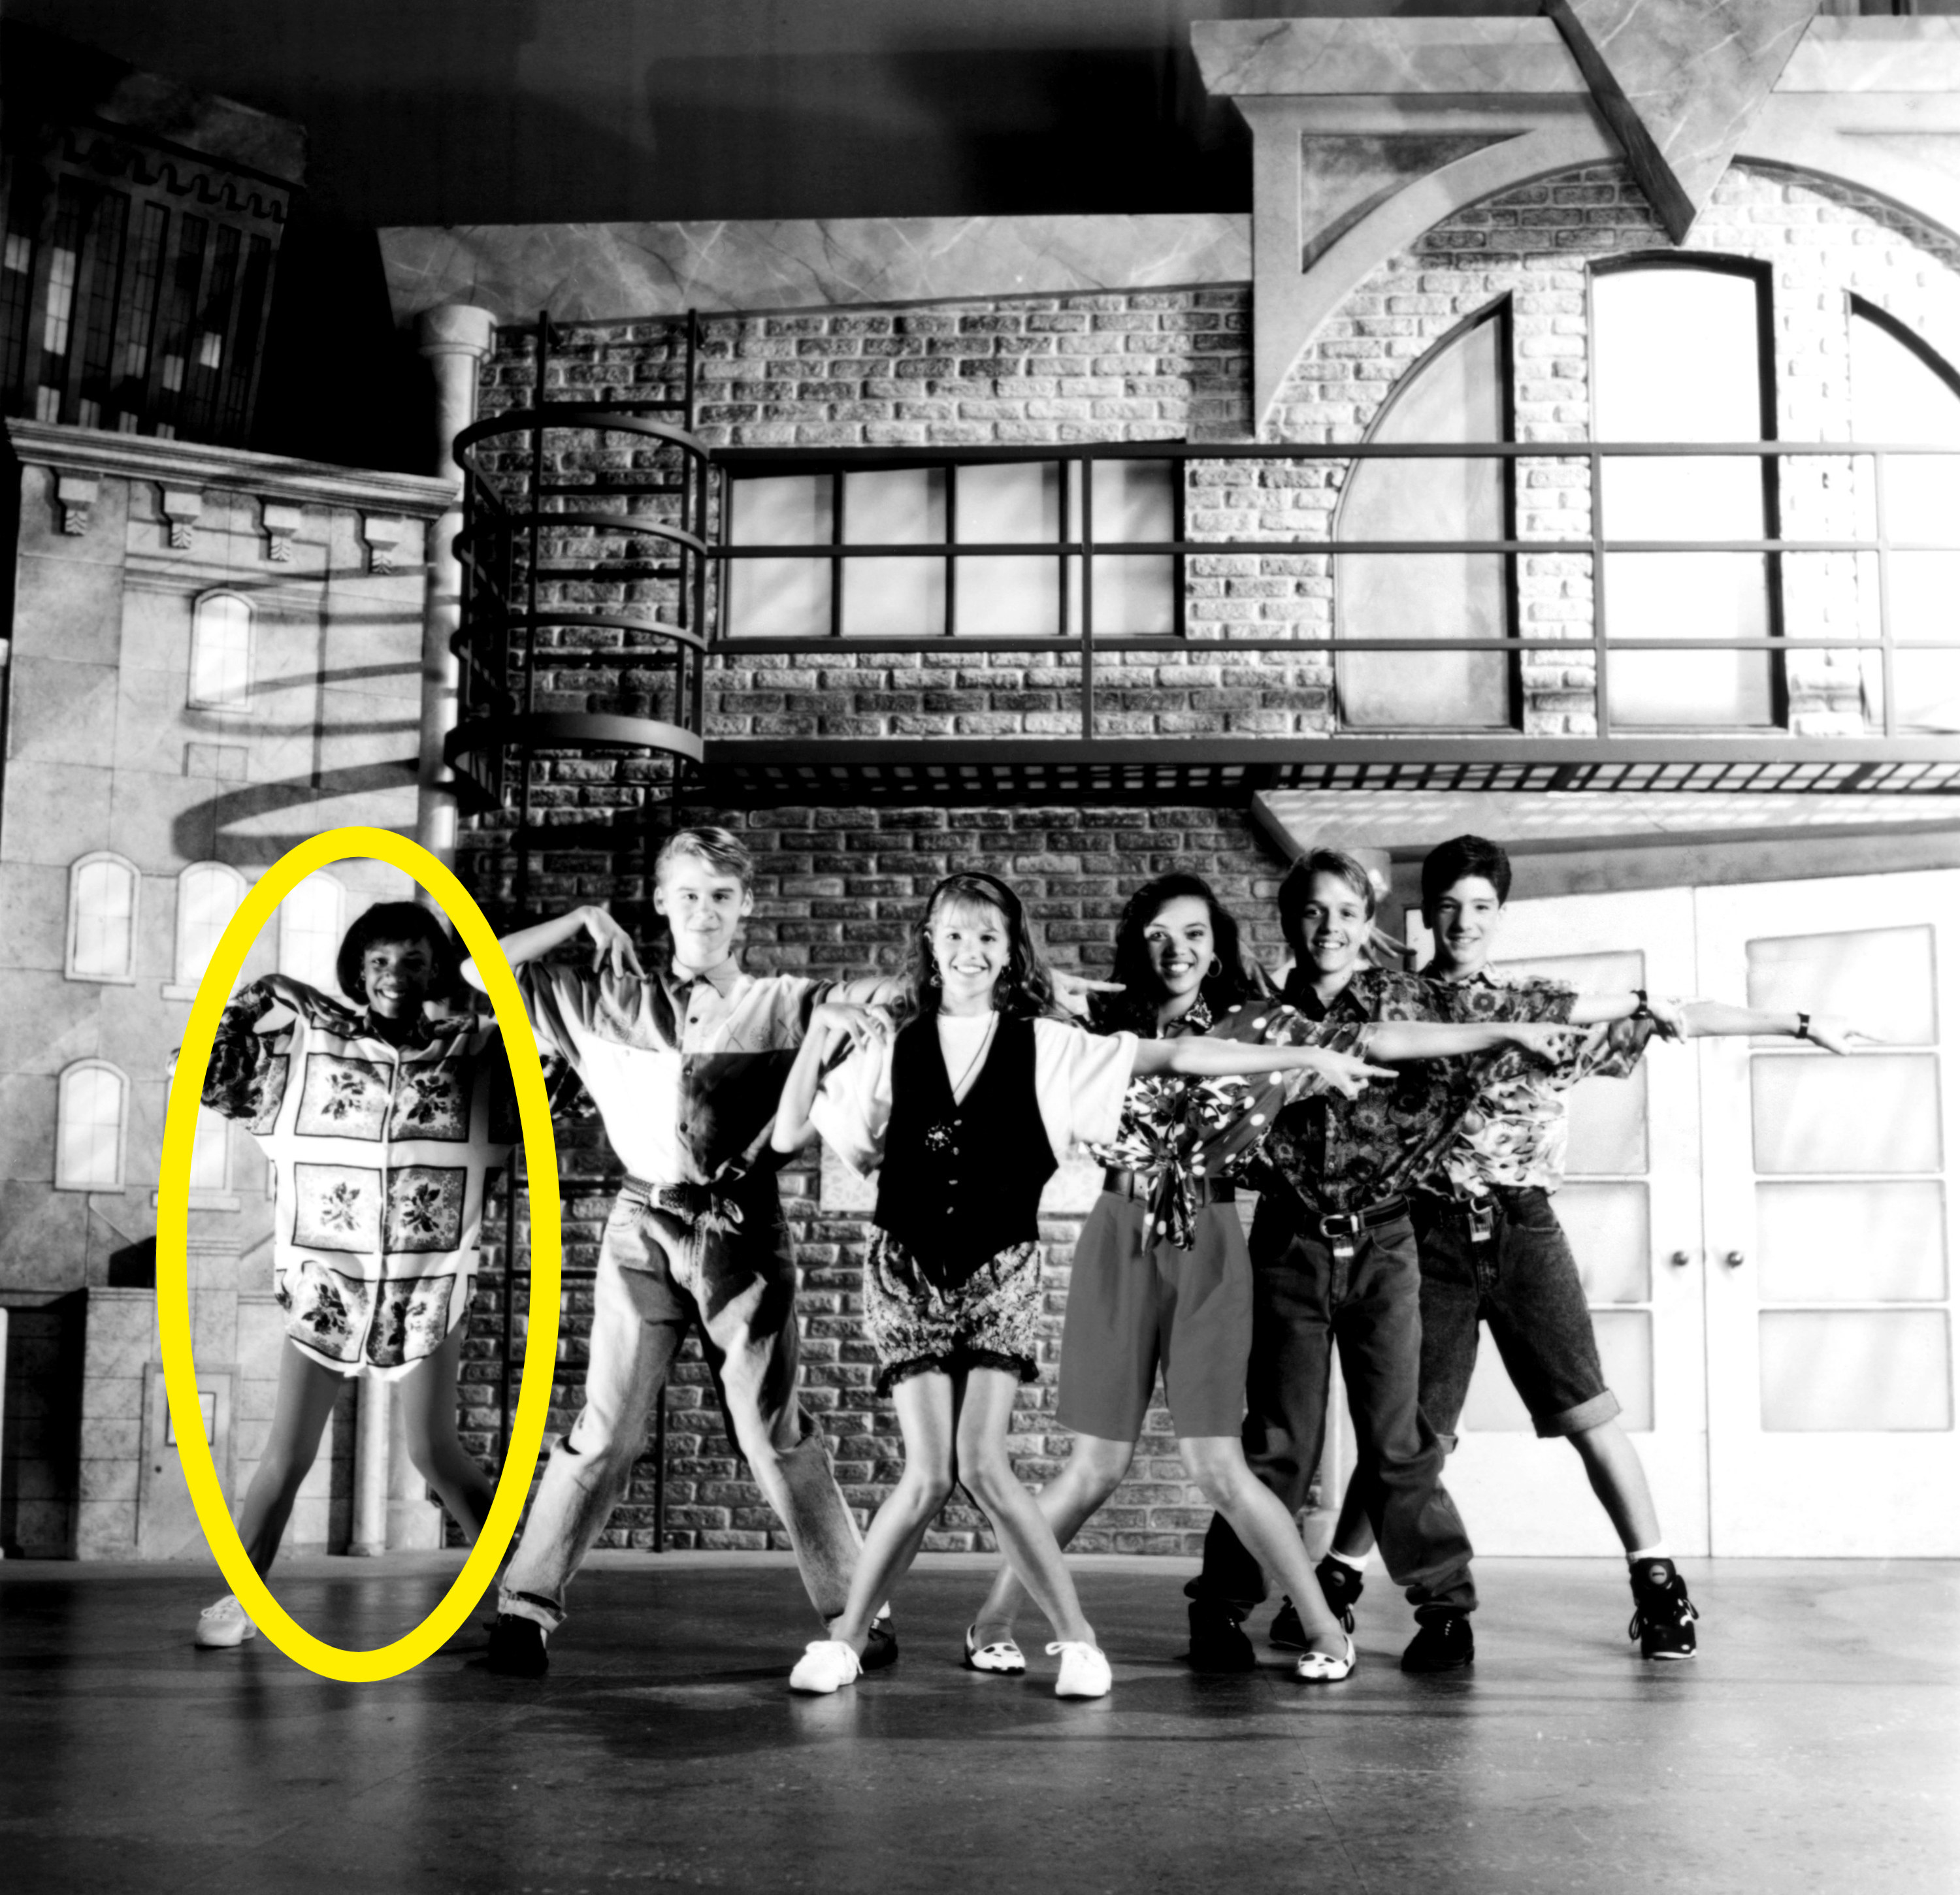 Rhona circled in an onstage scene from The All-New Mickey Mouse Club